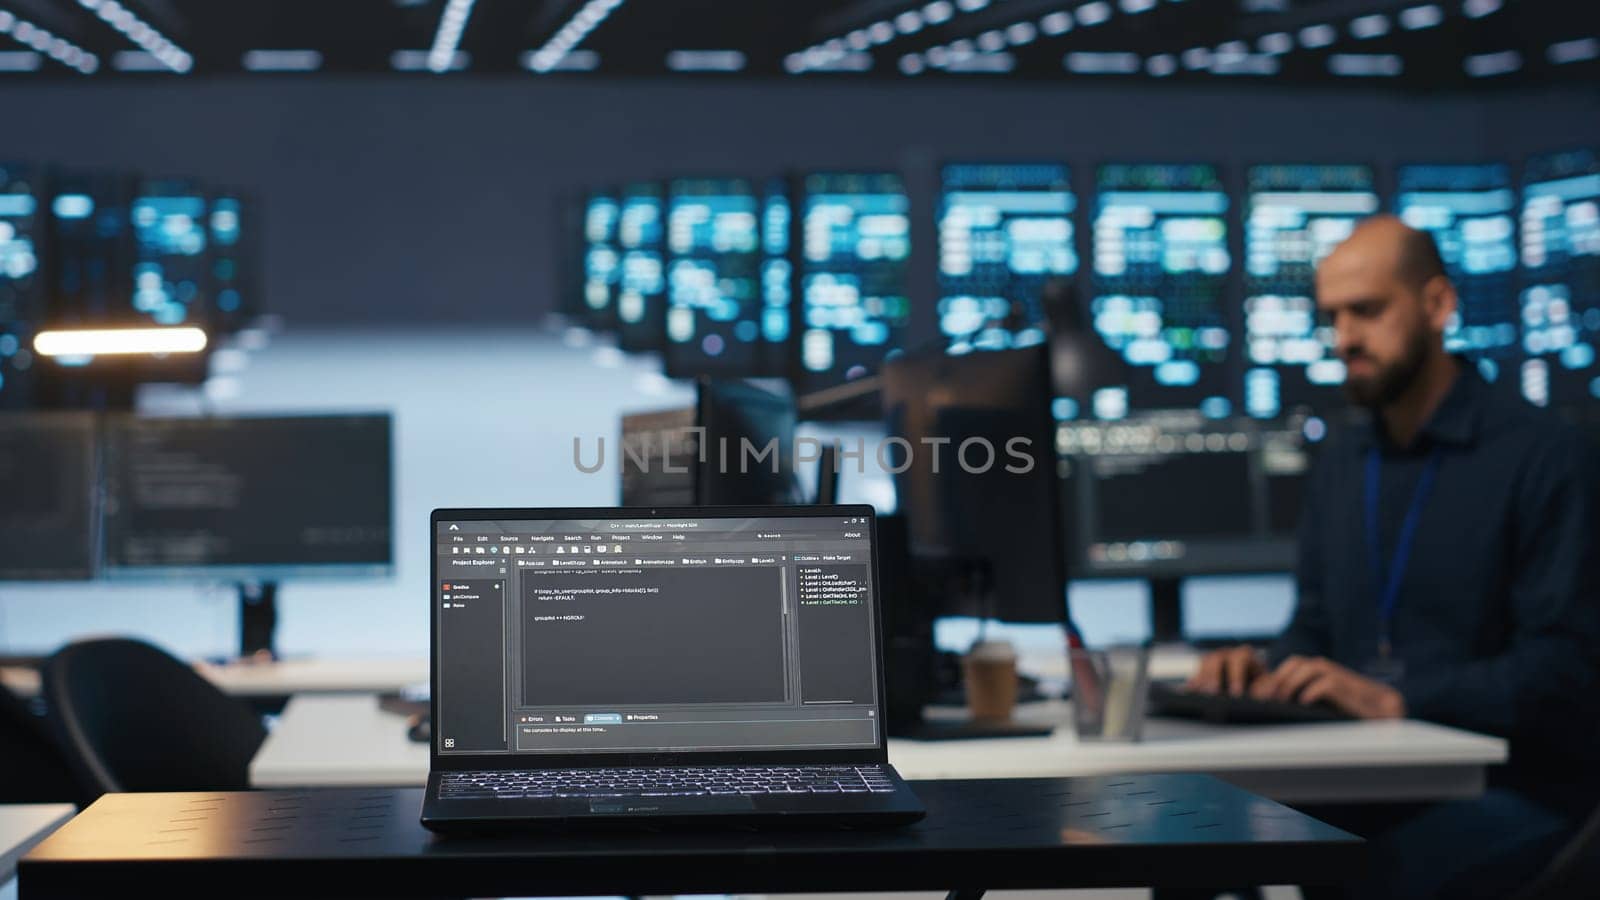 Focus on laptop used by expert in data center running code in blurry background by DCStudio